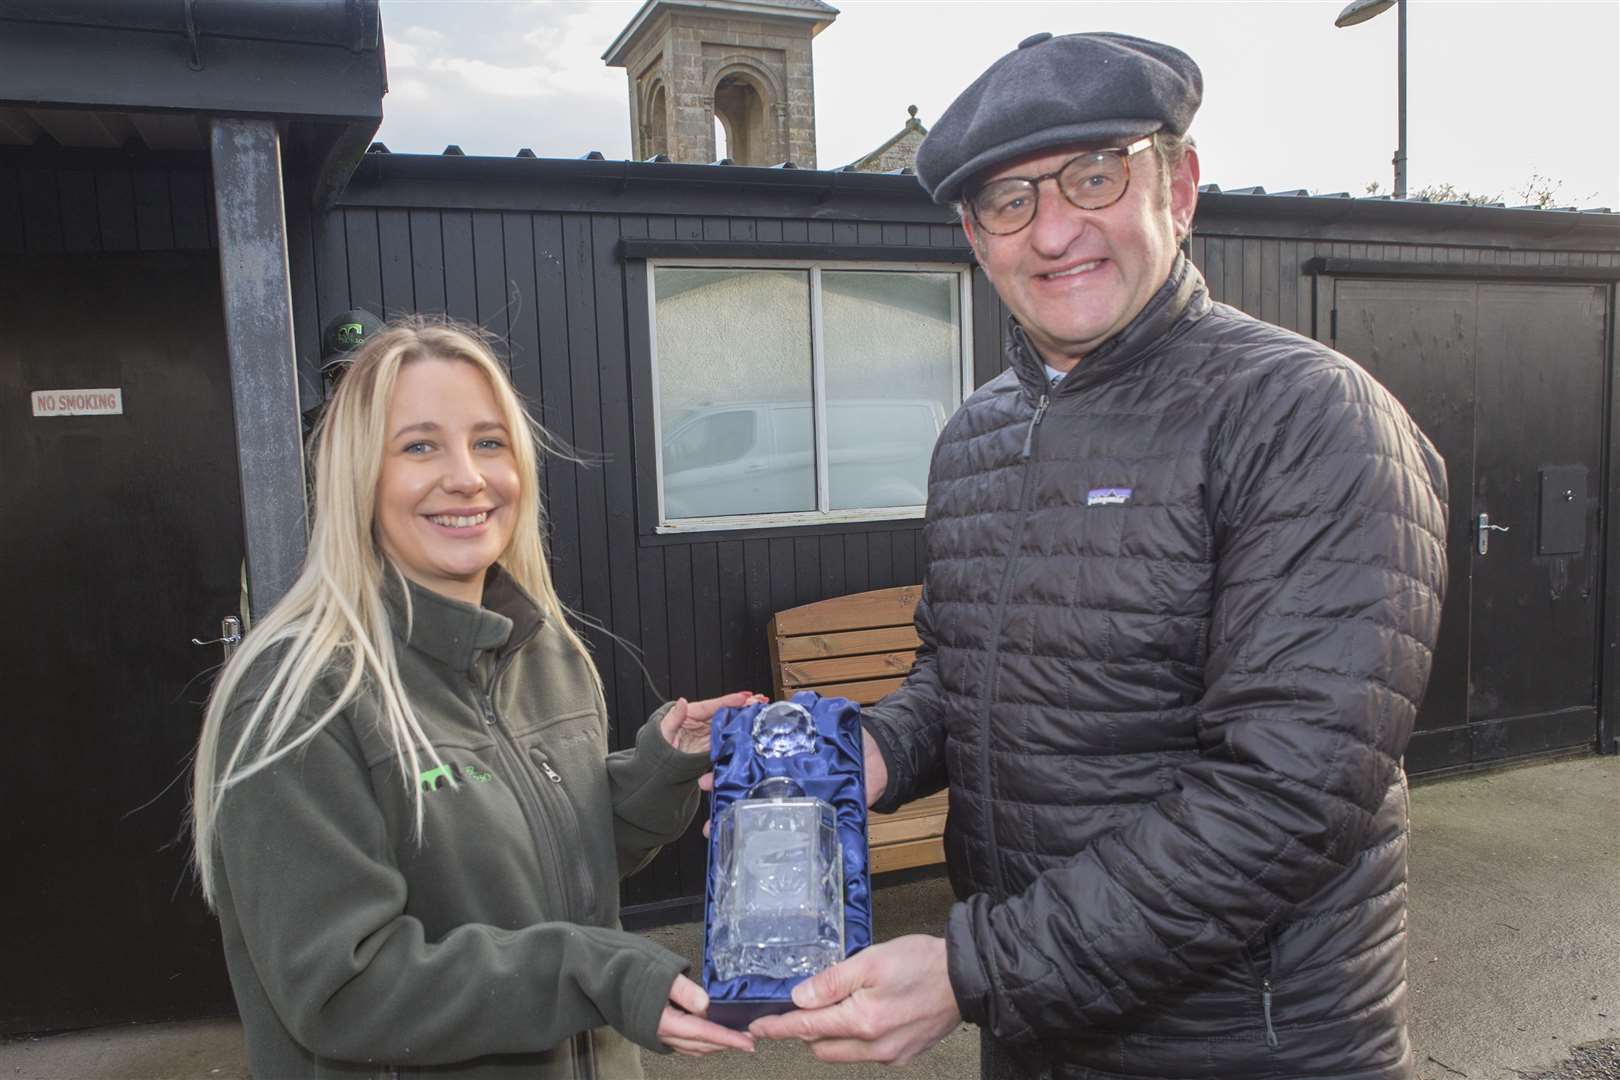 After officially opening the season on the River Thurso, Richard Medley from North Yorkshire is presented with an engraved decanter by Jessica Dreaves, the river's fishing co-ordinator. Picture: Robert MacDonald / Northern Studios